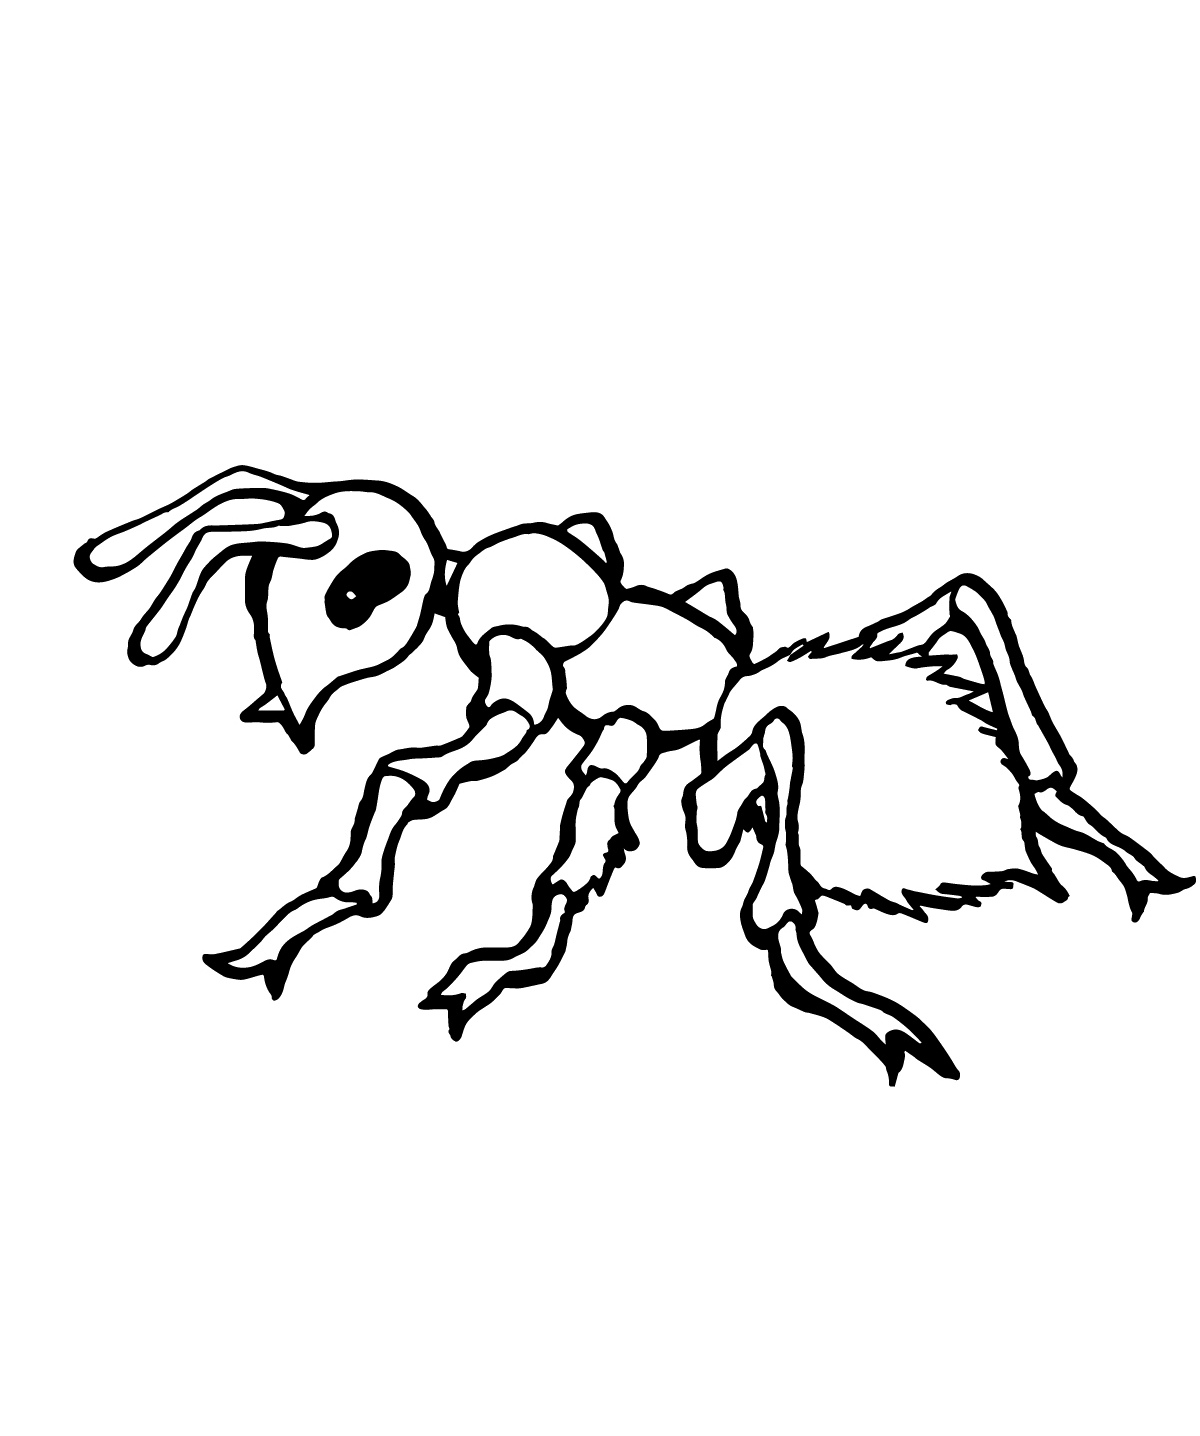 Printable Ant Coloring Pages | Coloring Me